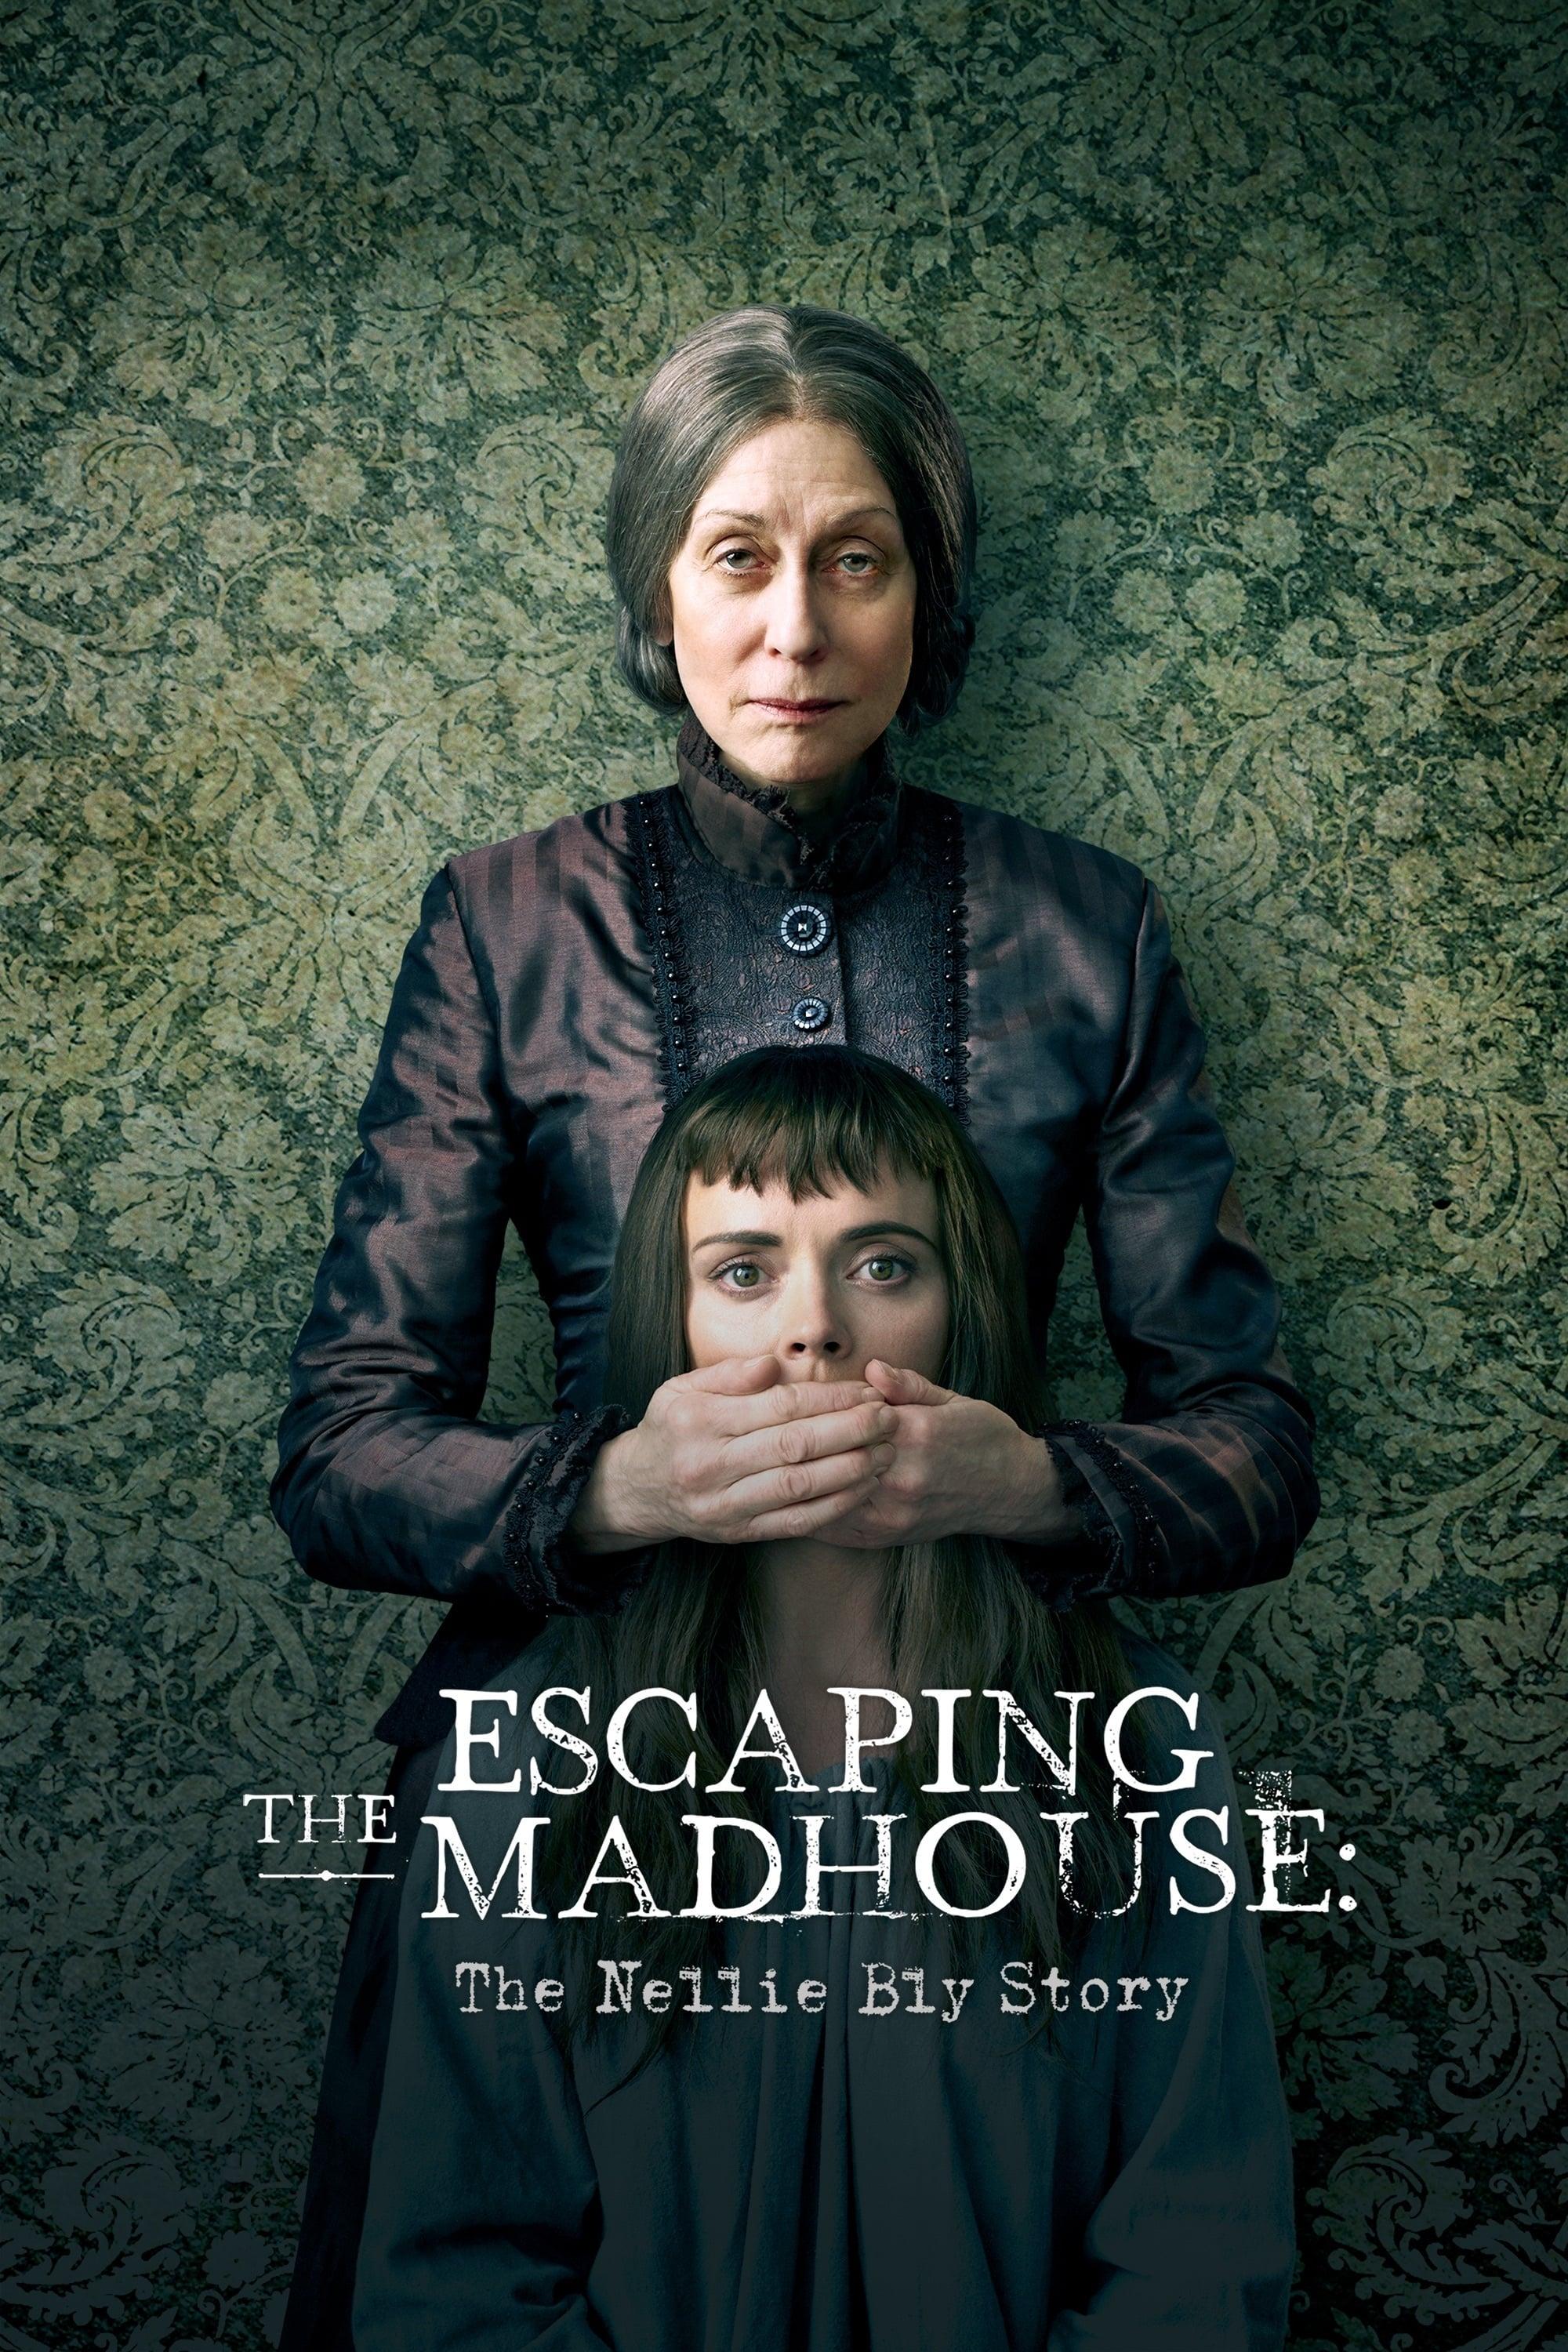 Escaping the Madhouse: The Nellie Bly Story poster